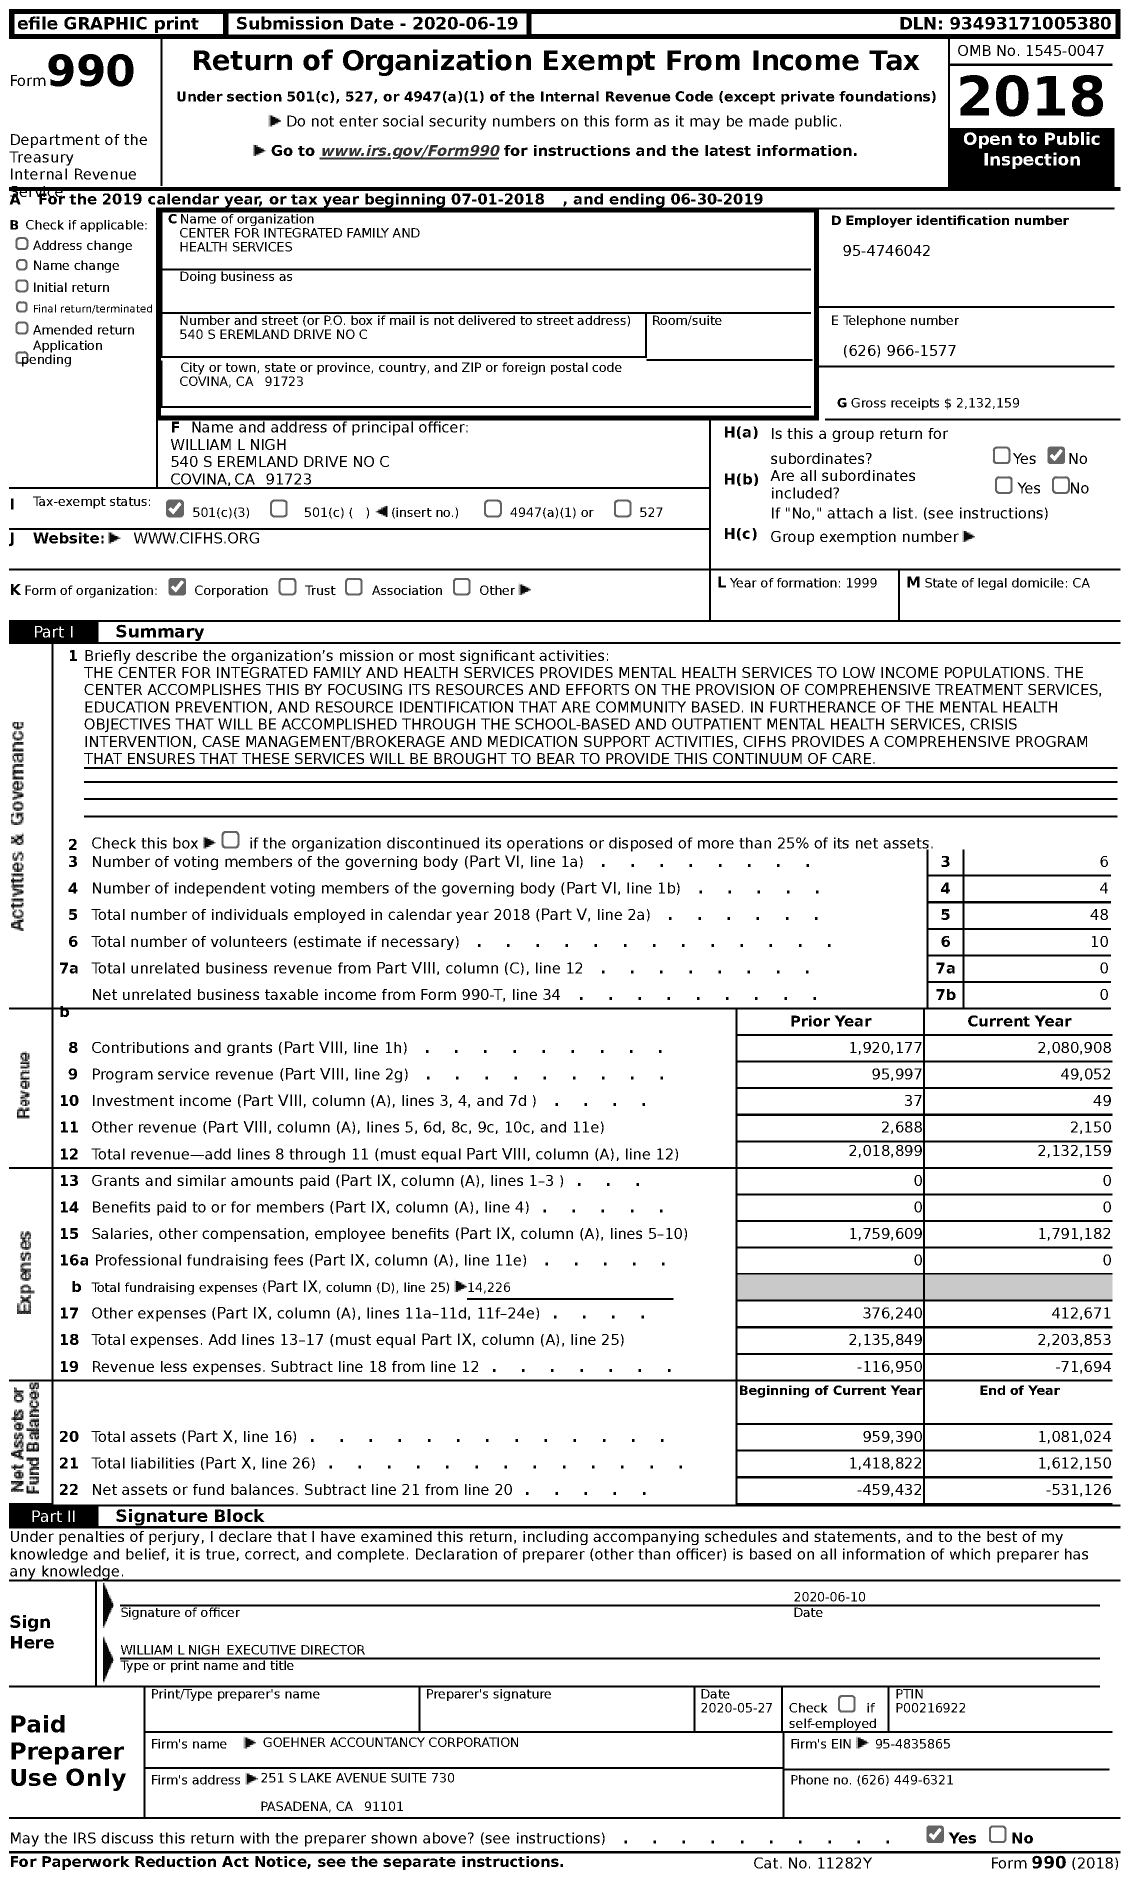 Image of first page of 2018 Form 990 for Center for Integrated Family and Health Services (CIFHS)